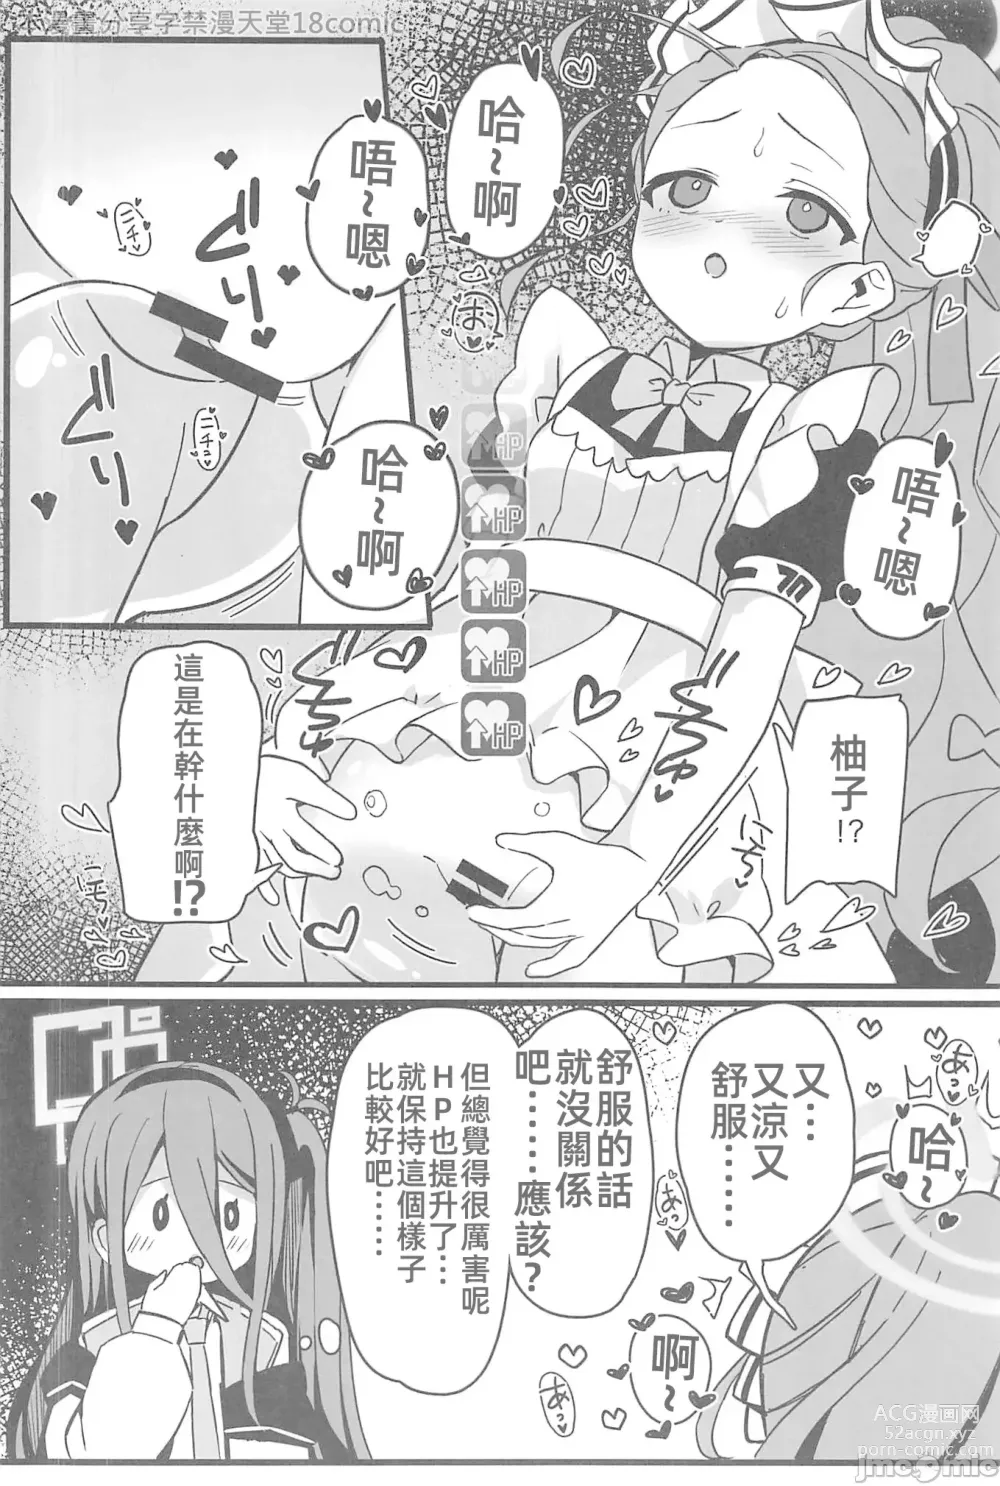 Page 7 of doujinshi 絕對要攻克給你看!!